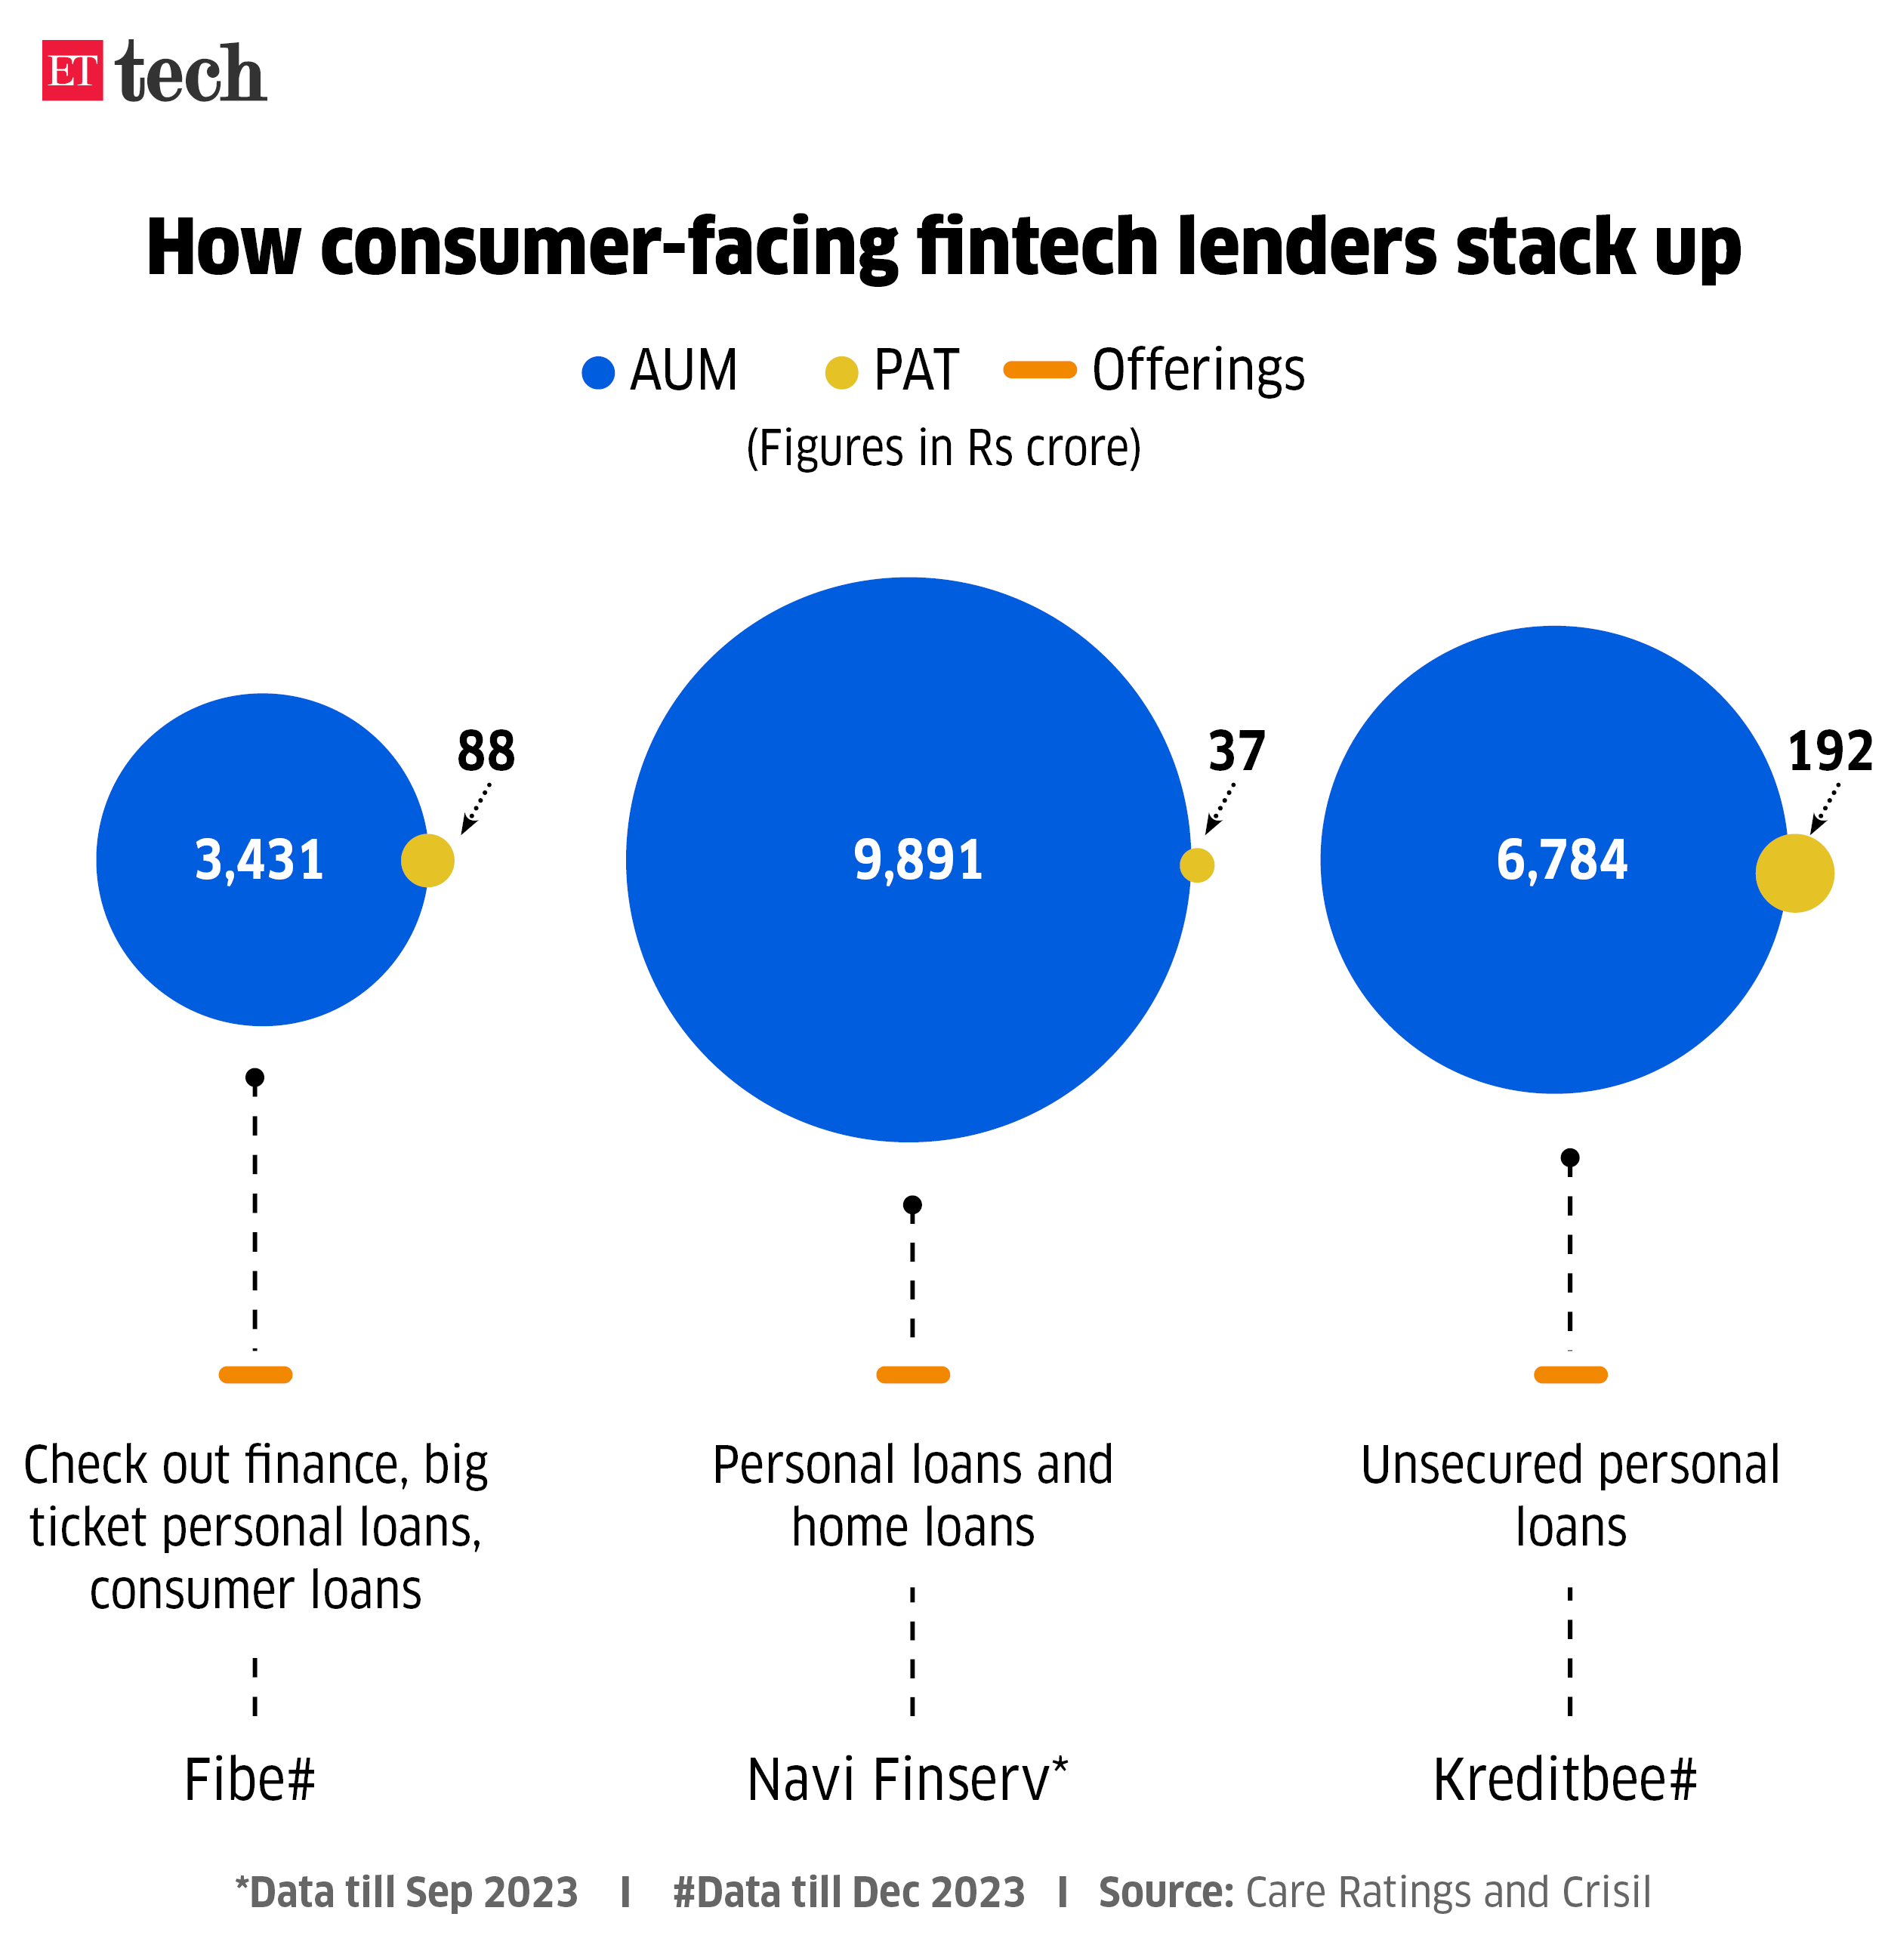 How consumer-facing fintech lenders stack up